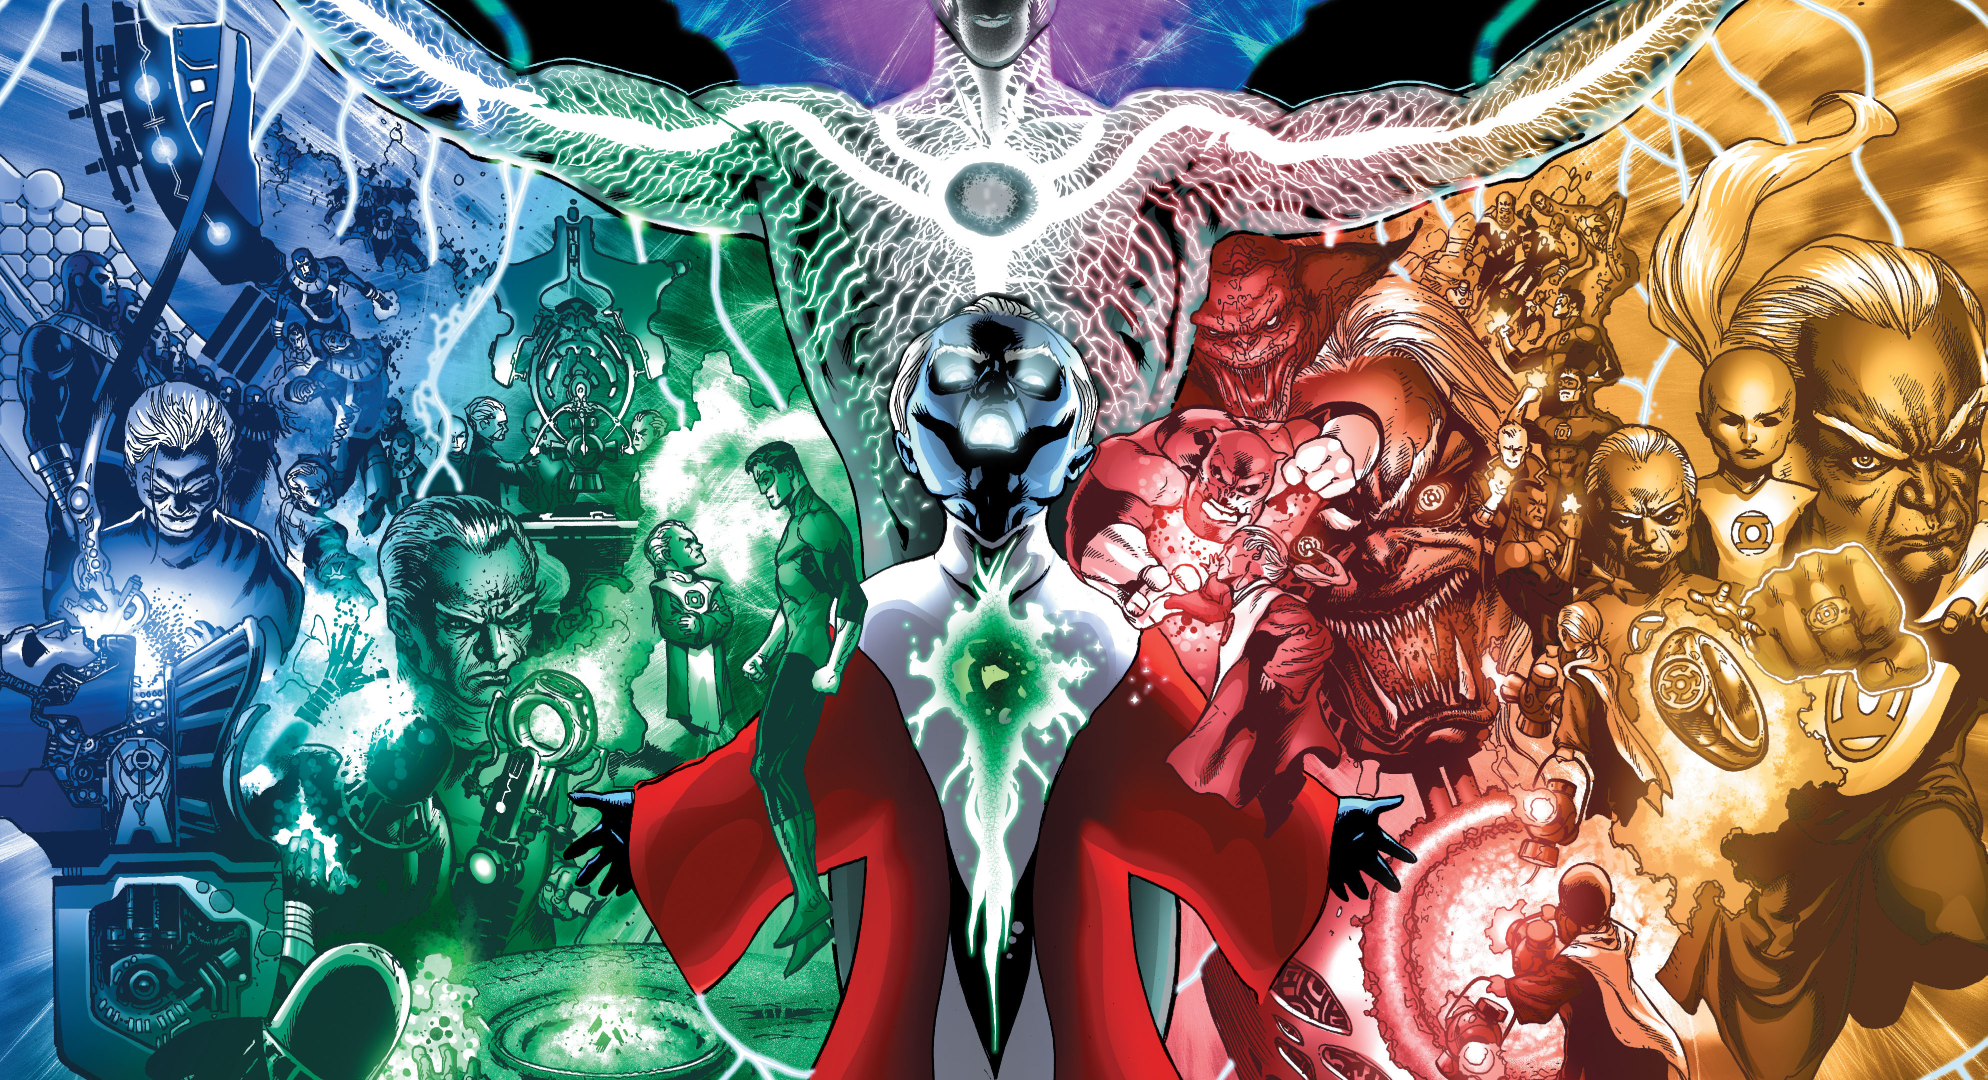 Wrath Of The First Lantern #9